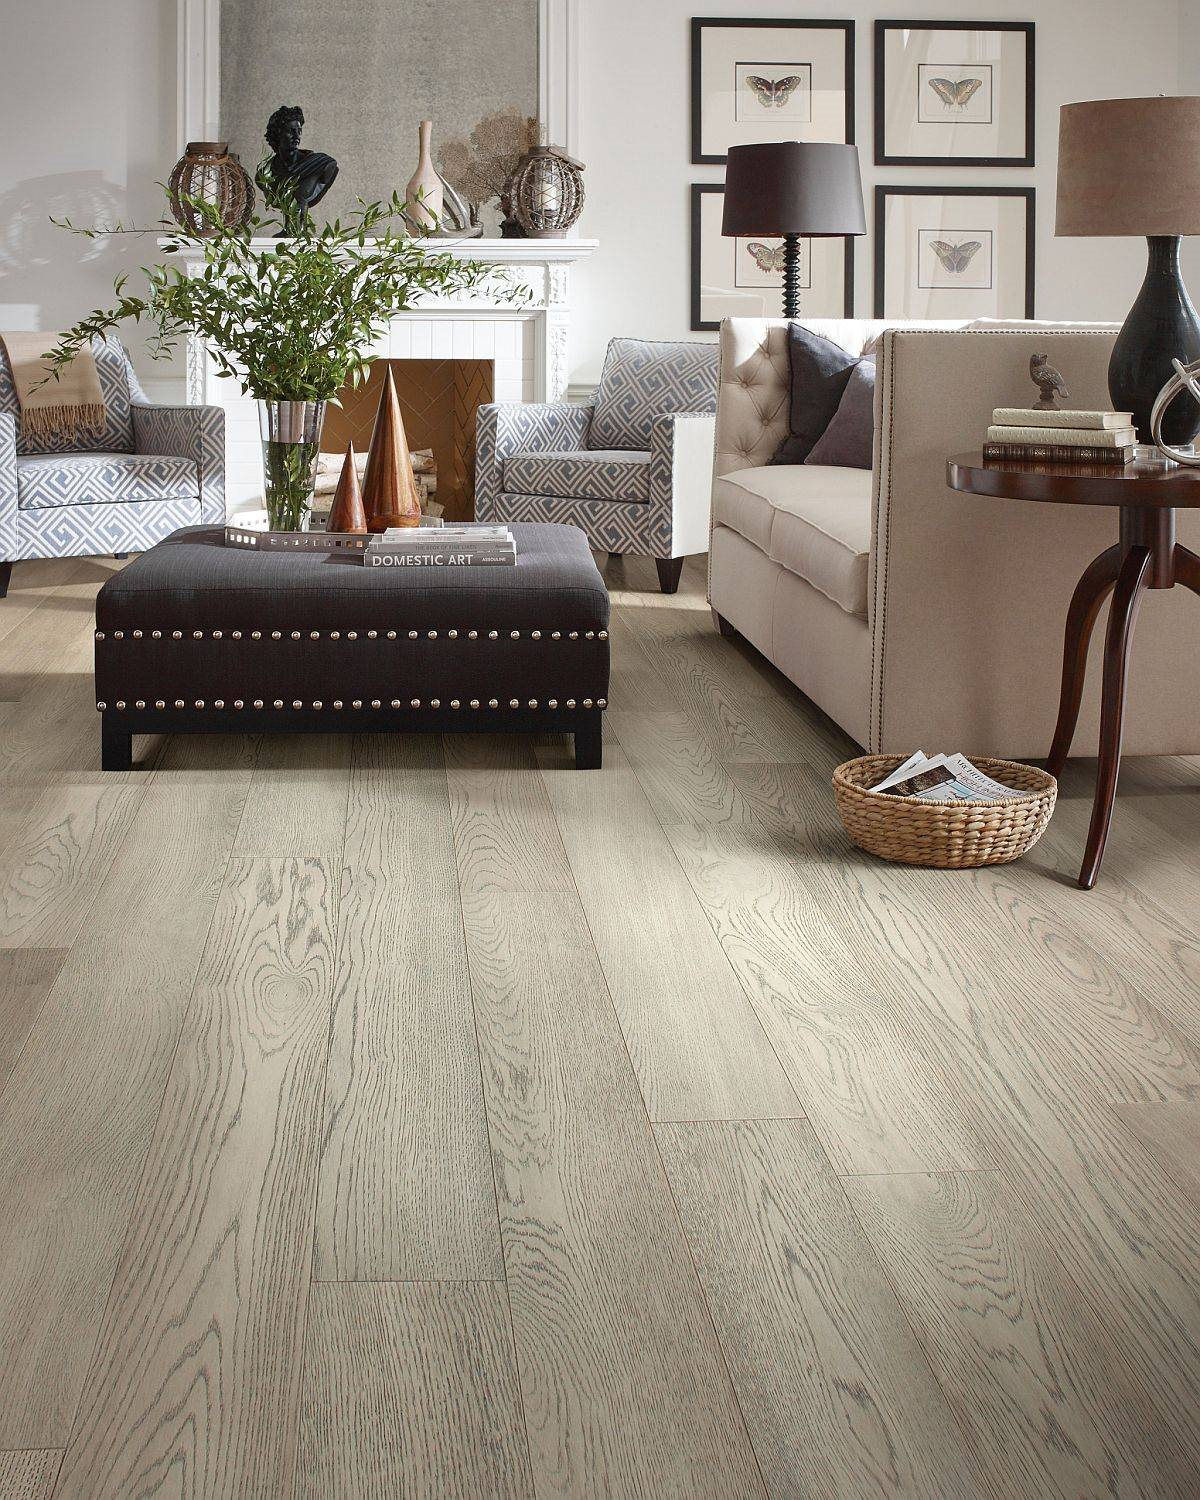 wood-flooring-with-a-hint-of-gray-is-a-trendy-choice-this-spring-86398.jpg